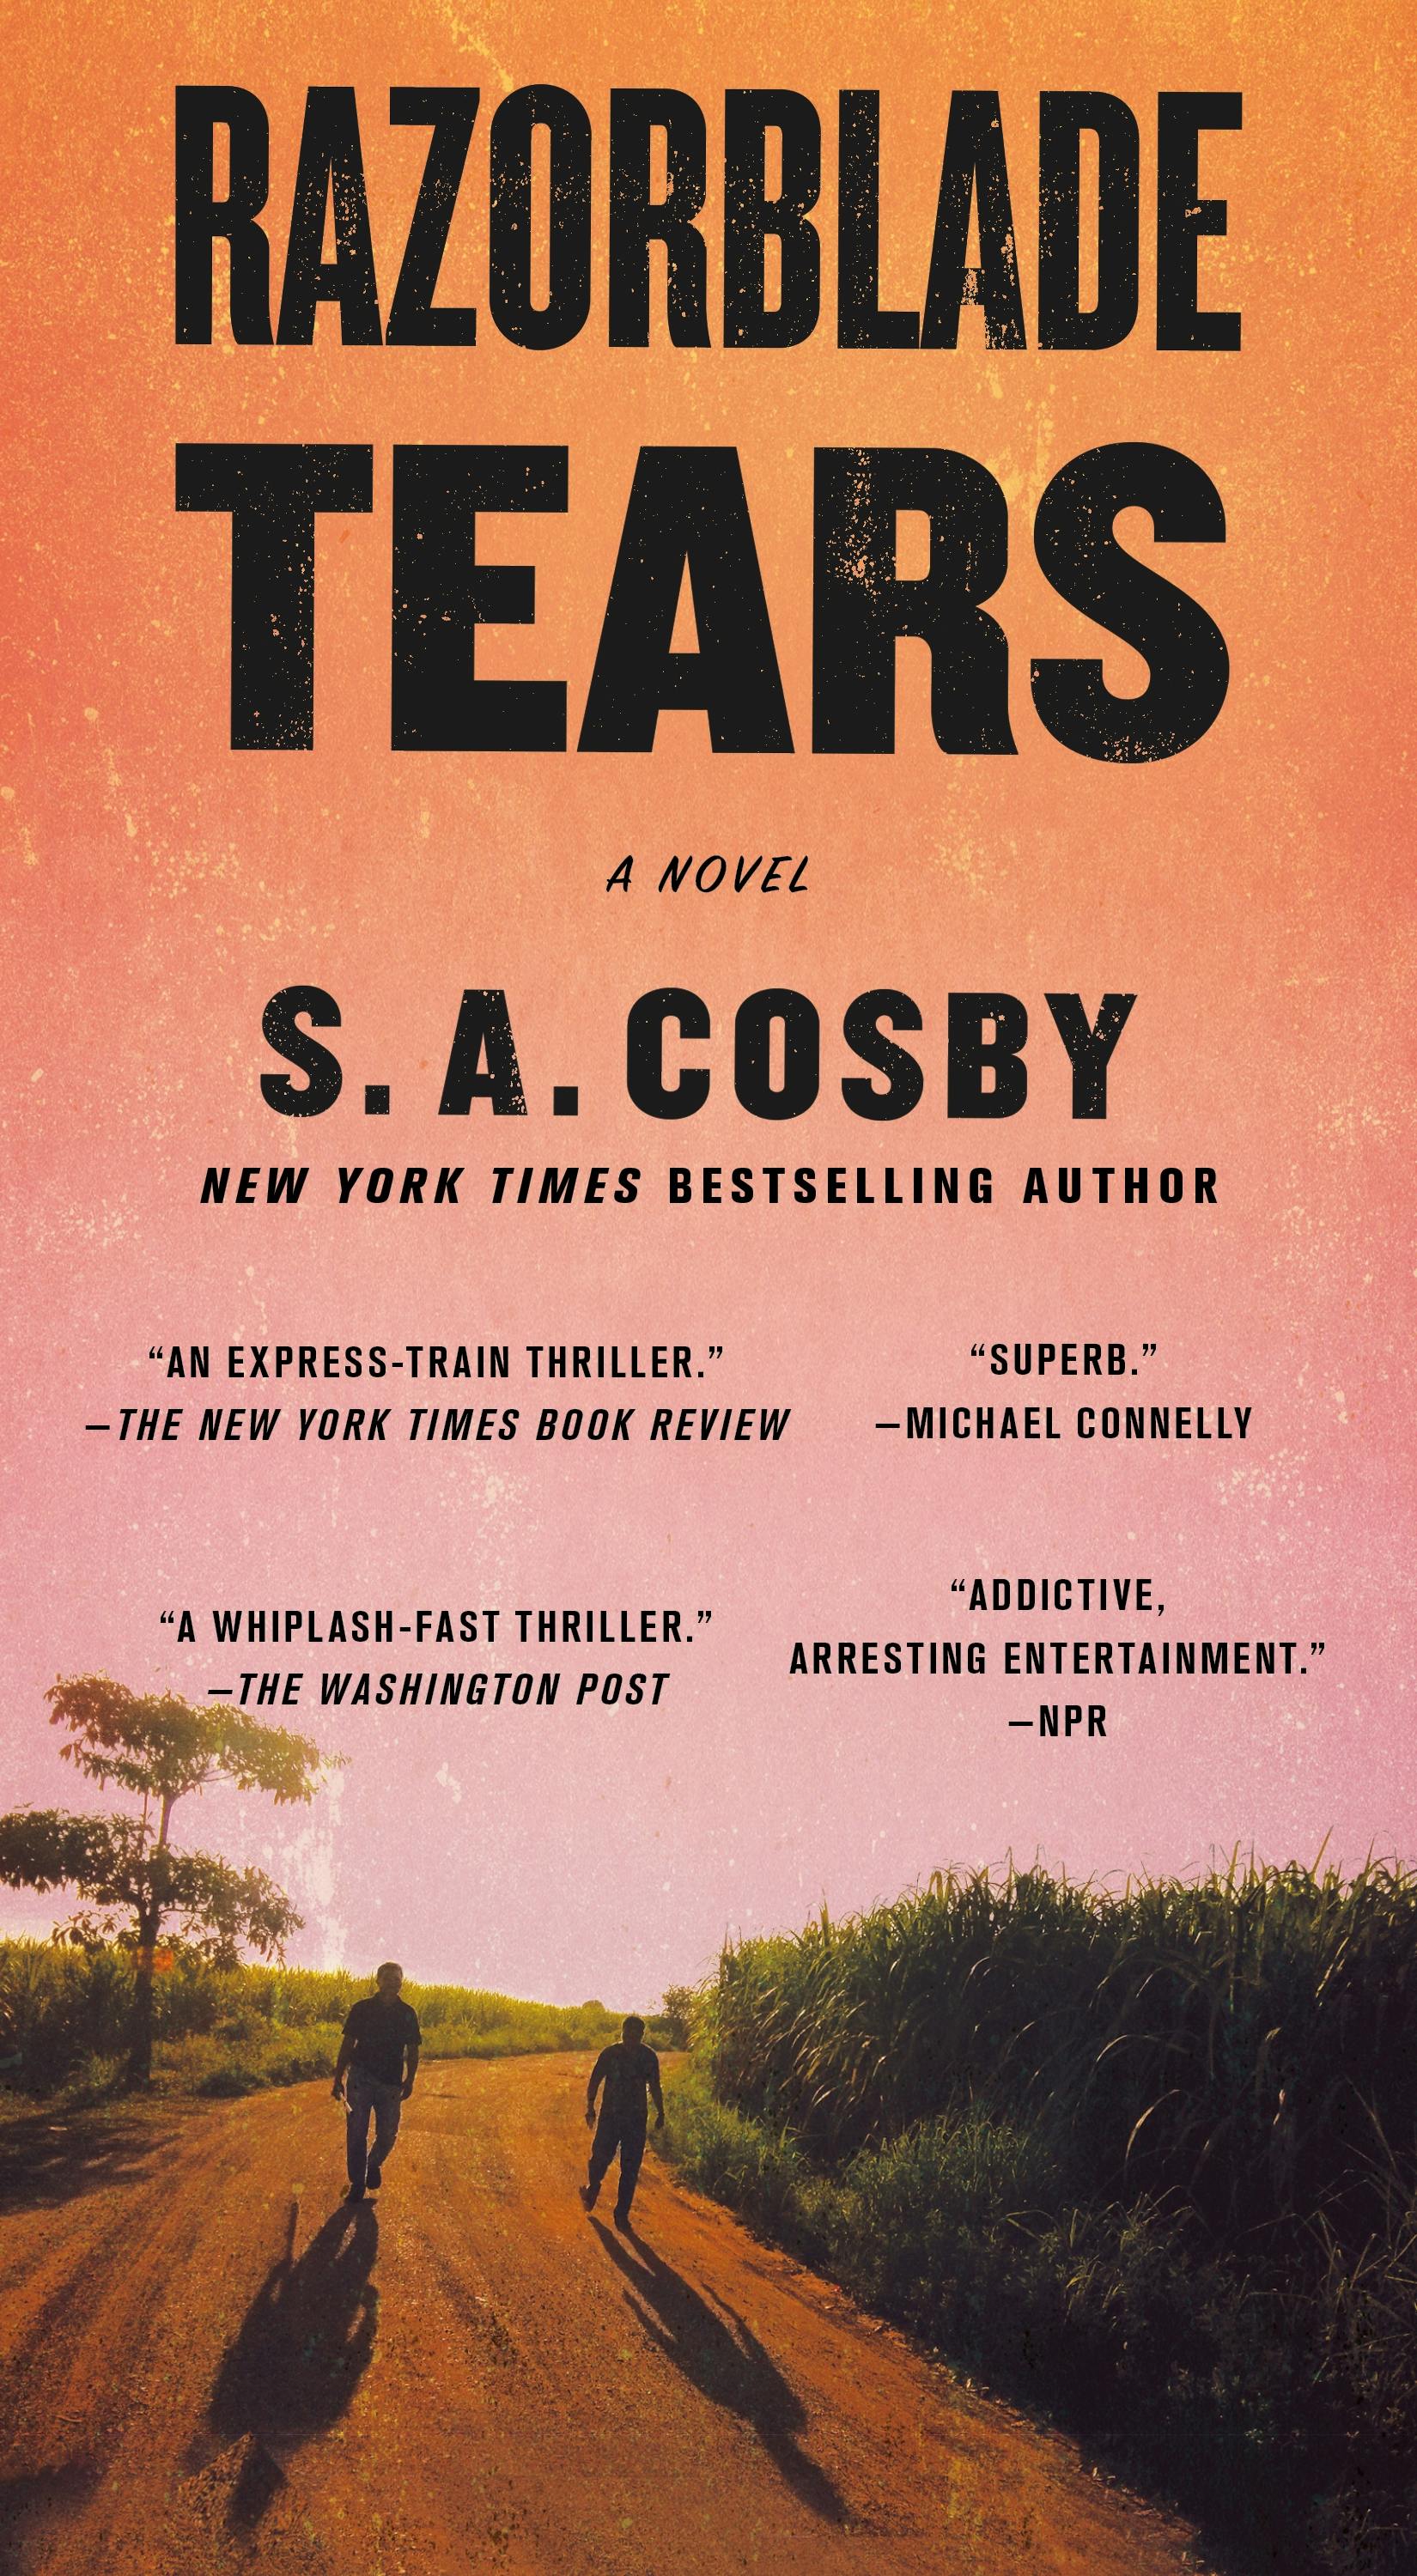 My First Thriller: S.A. Cosby ‹ CrimeReads